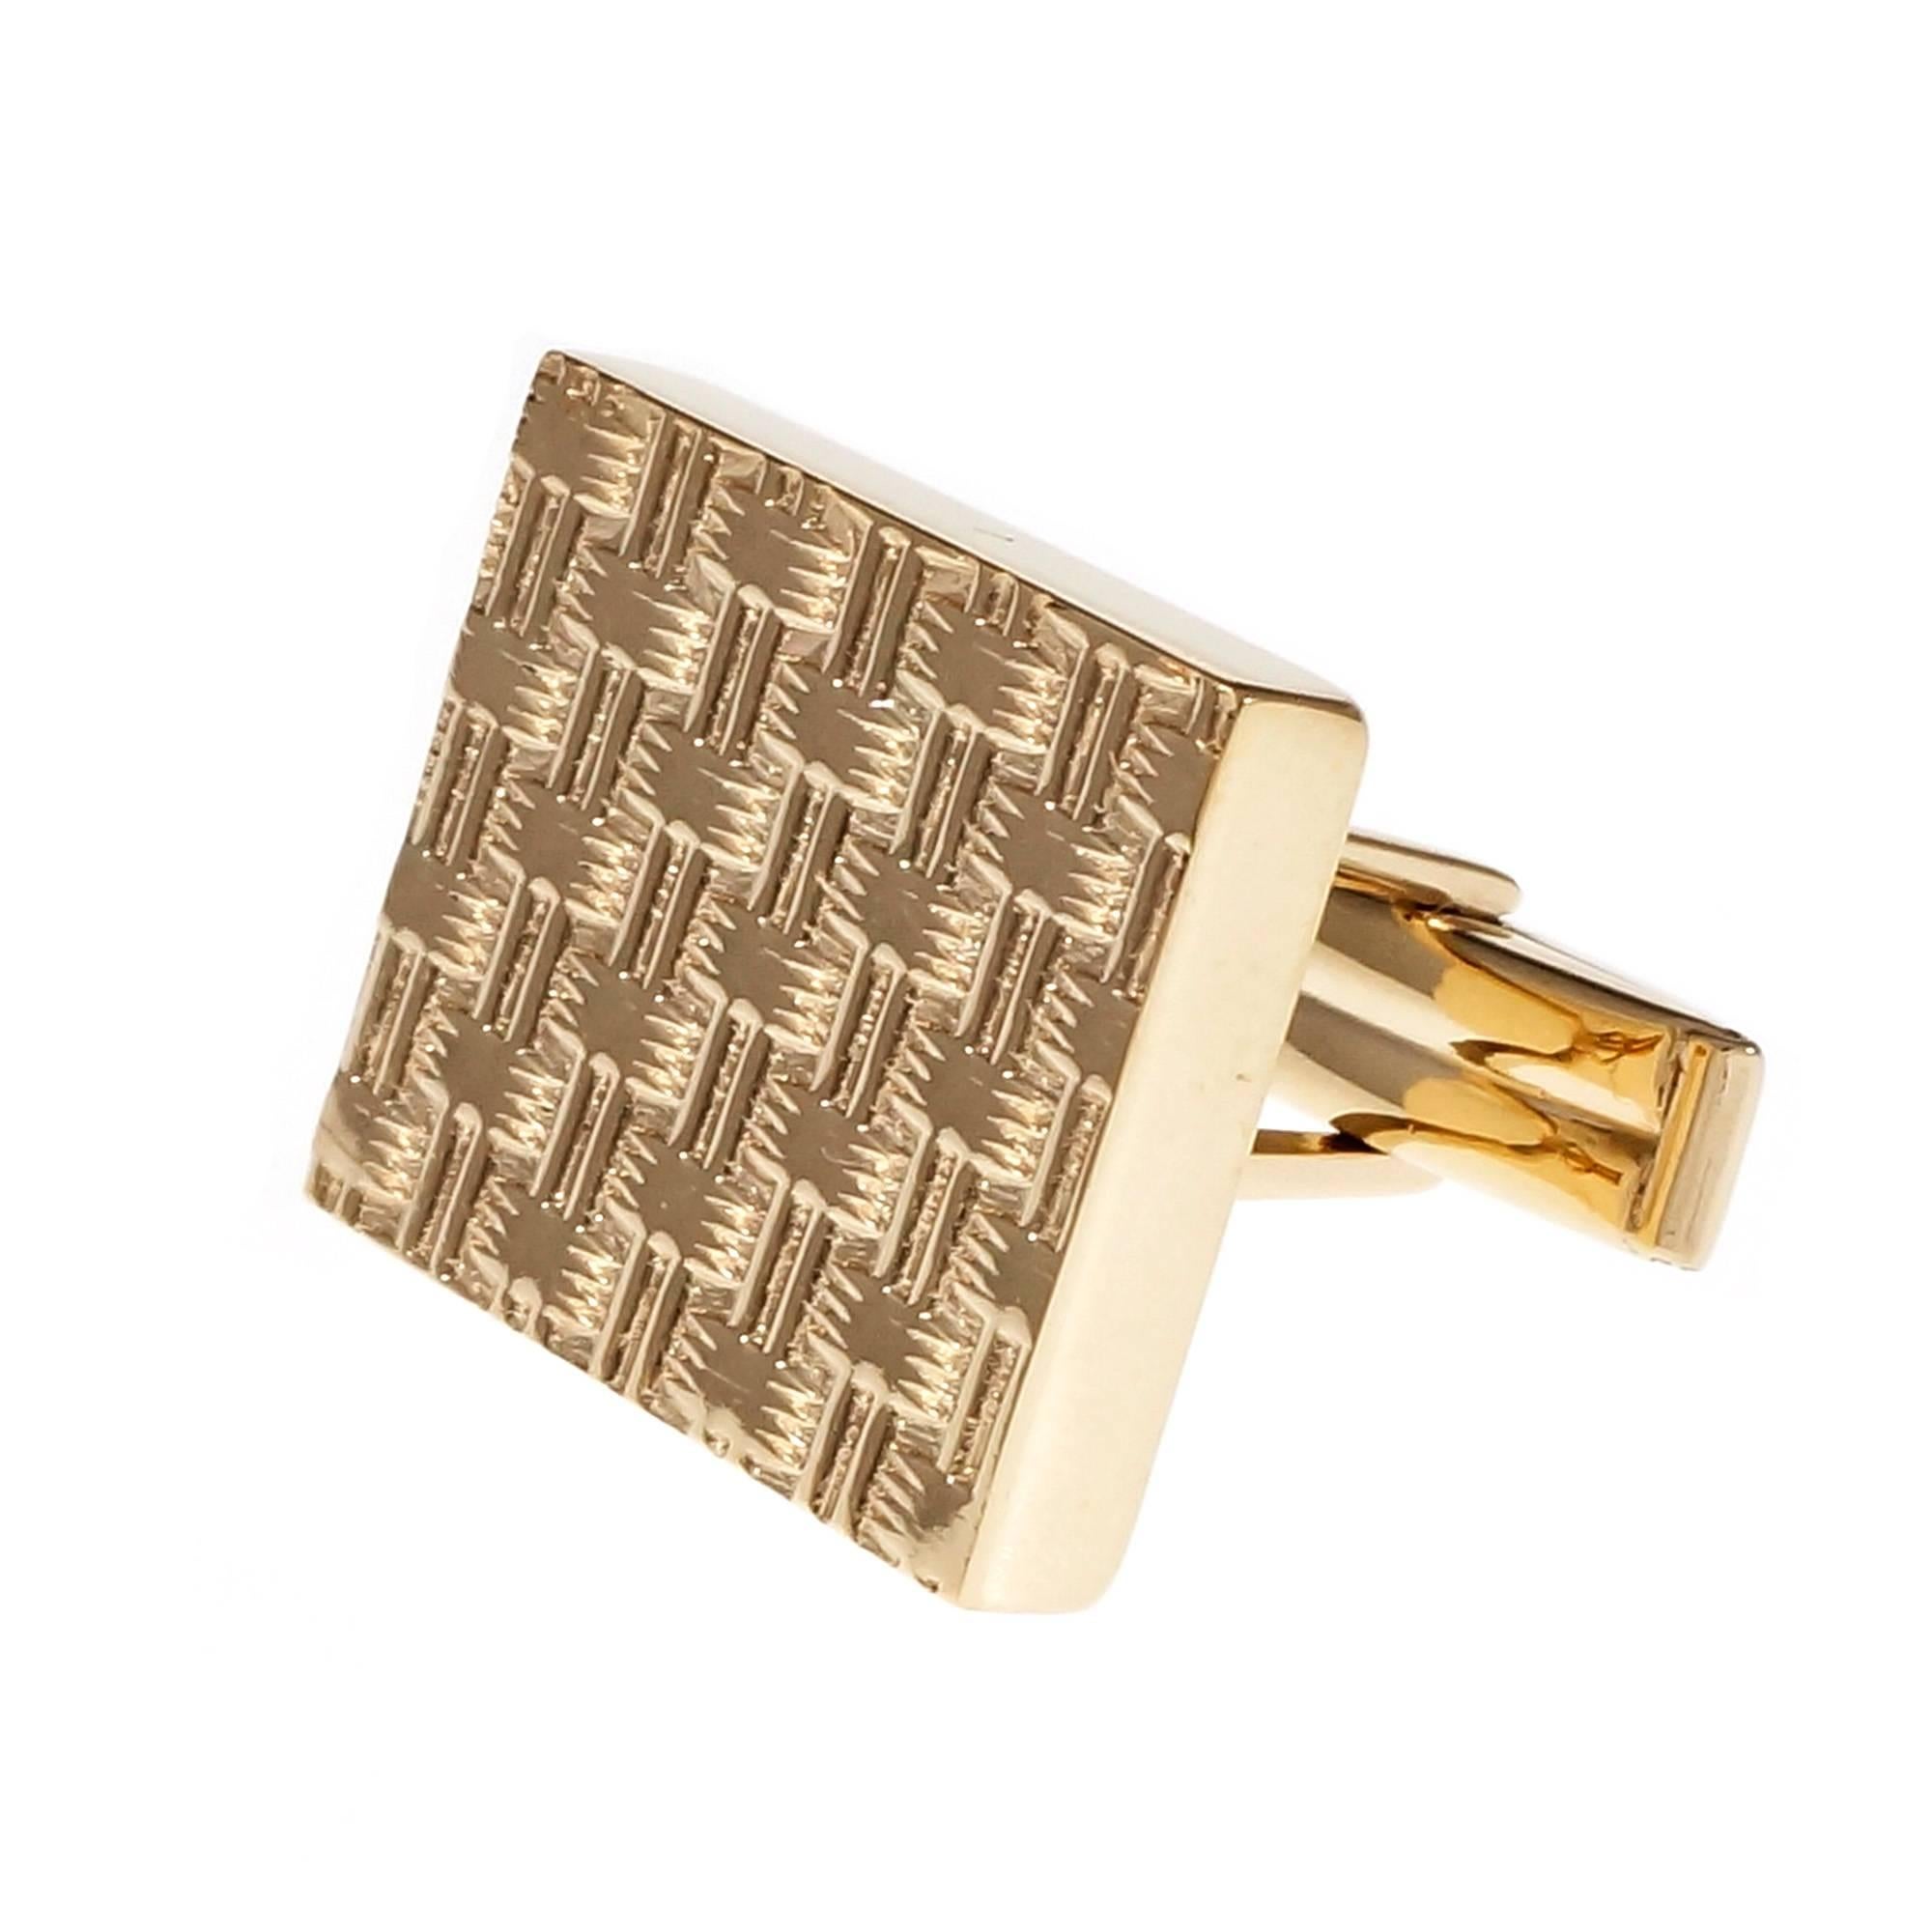 Braided design rectangular 1960’s cufflinks 14k yellow gold.

14k yellow gold
14.4 grams
Tested and stamped: 14k
Hallmark: J
Top to bottom: 17.76mm or .70 inch
Width: 21.73mm or .85 inch
Depth: 3.74mm

